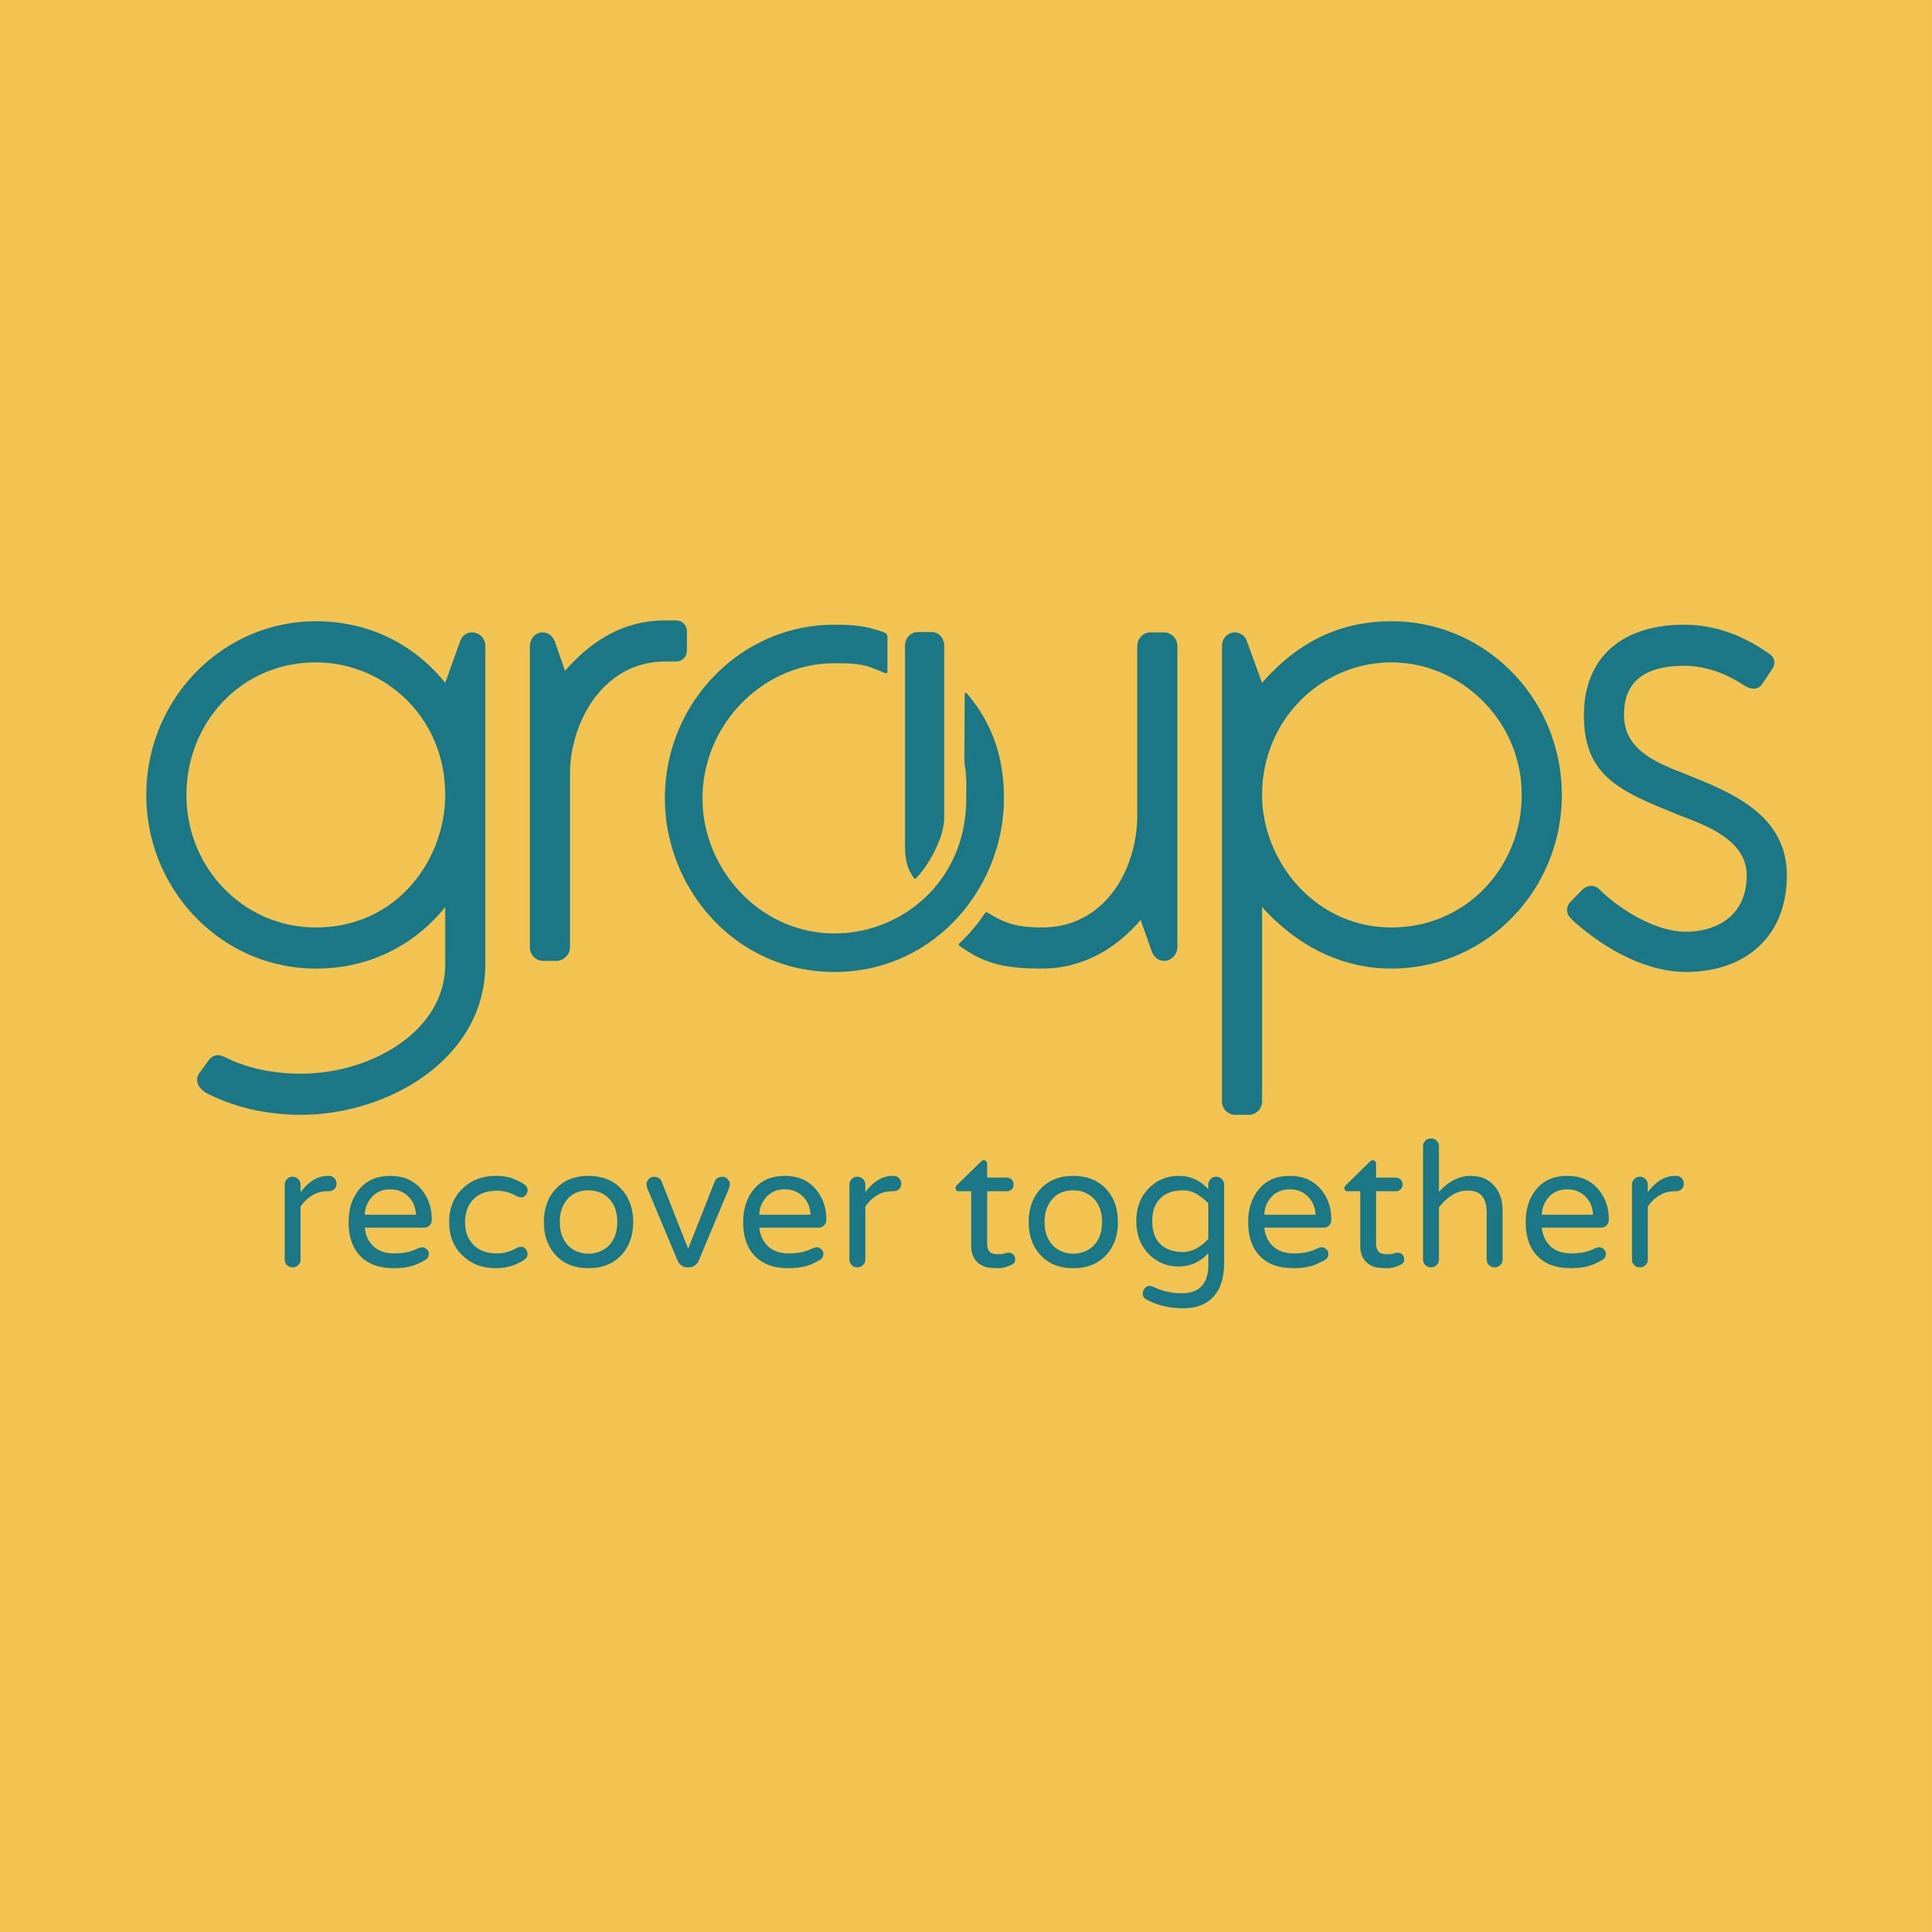 Groups Recover Together - Crunchbase Company Profile & Funding